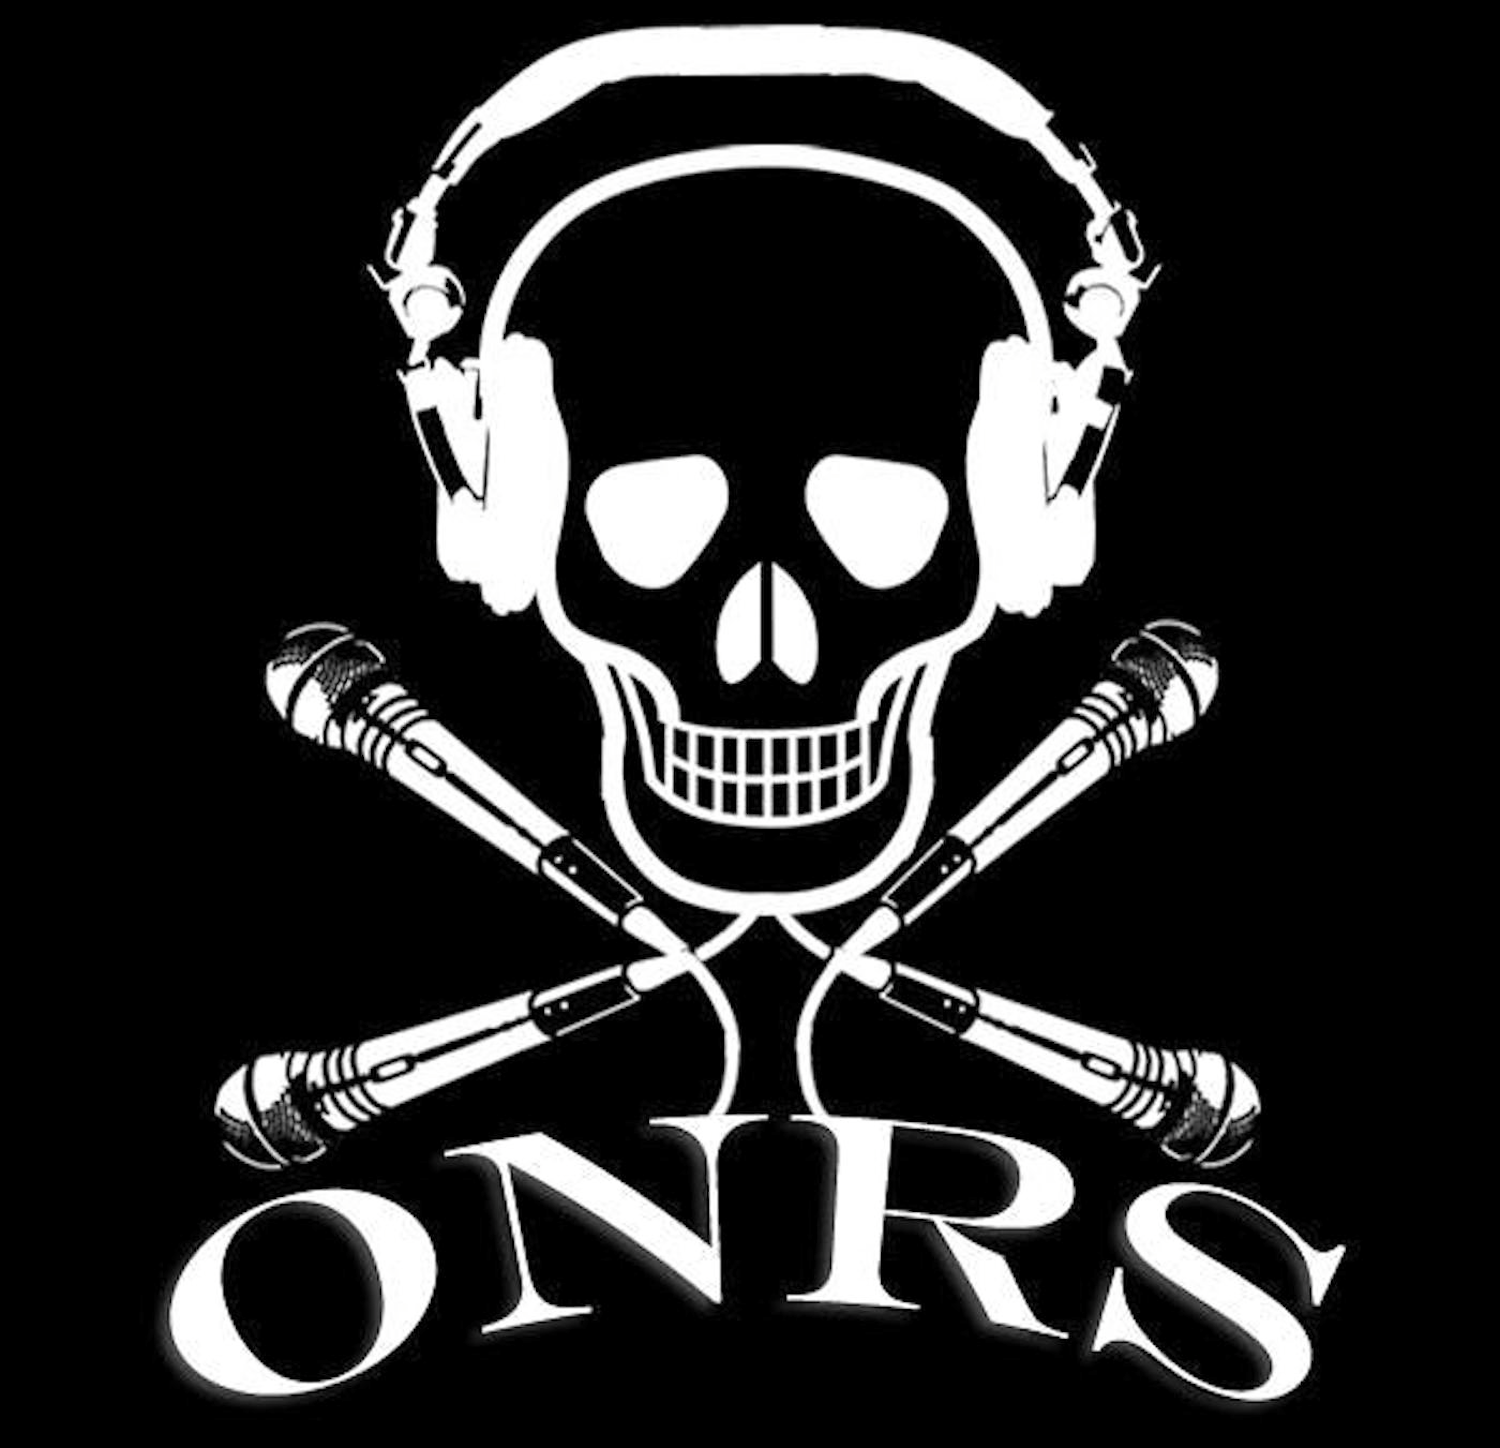 ONRS - EP 351 - Lemmy's Ghost banged my wife, With Alex Morehead